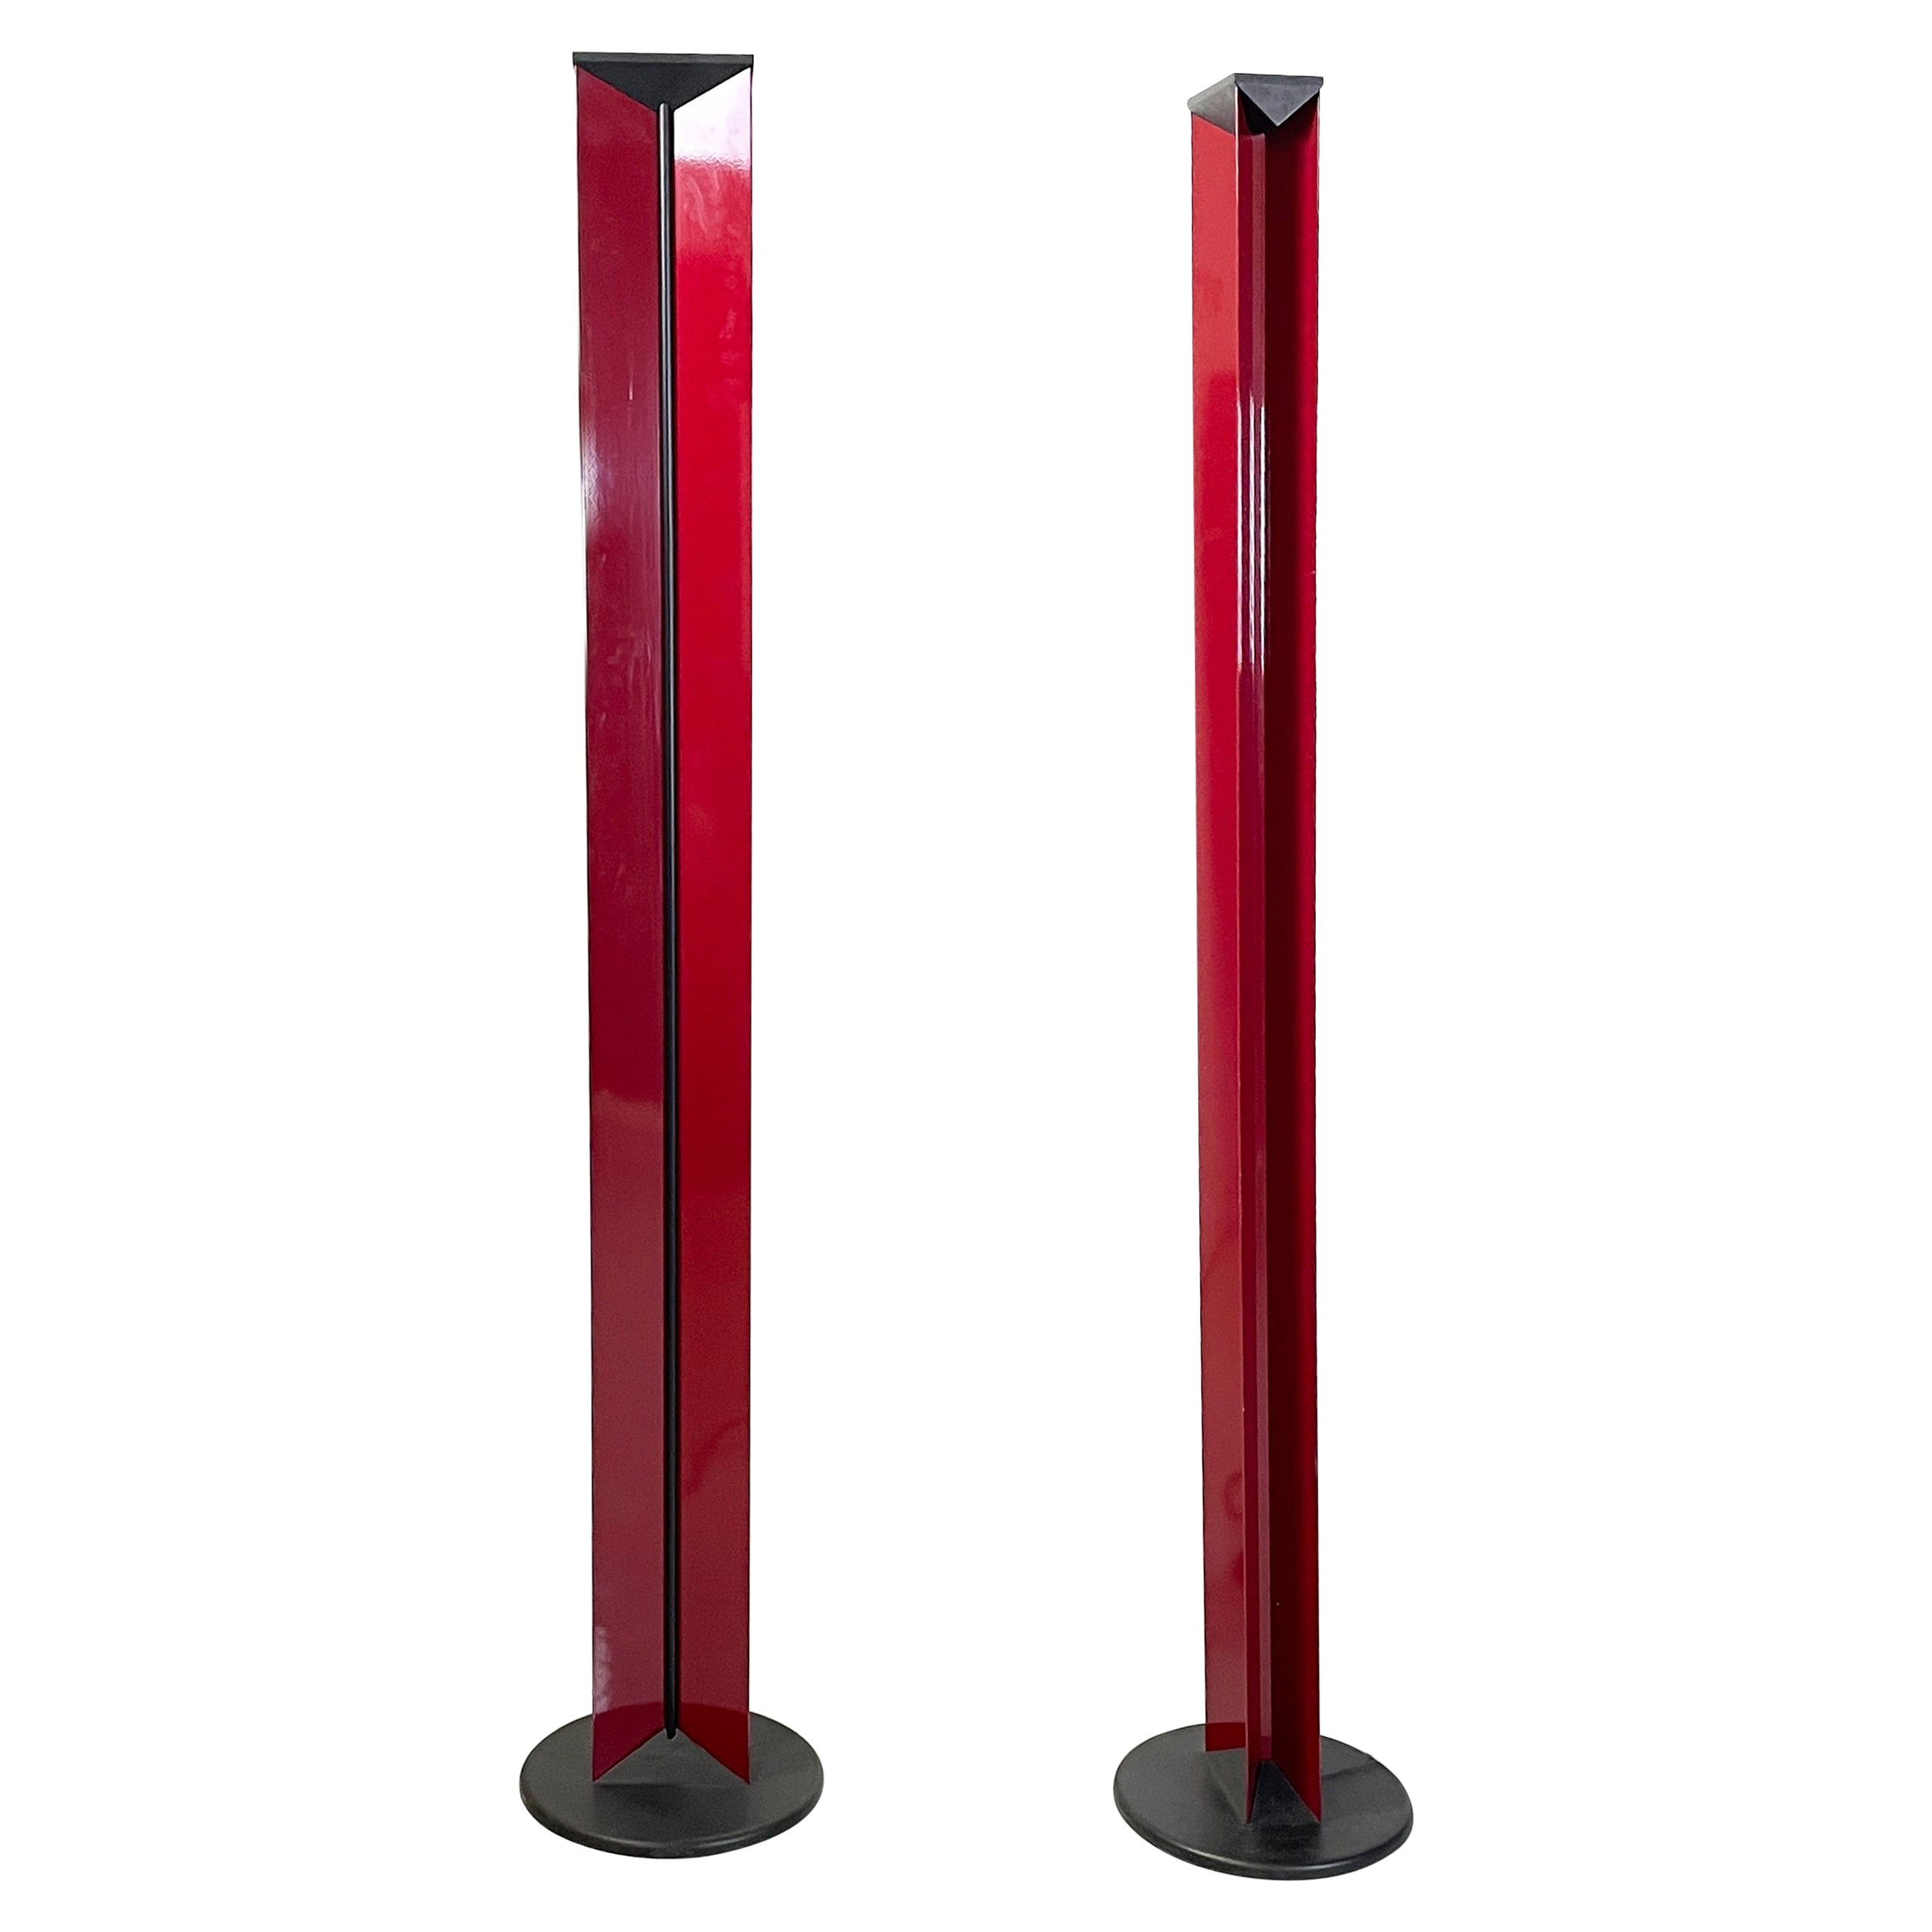 Italian modern Floor lamps in red metal and black plastic by Relco, 1990s